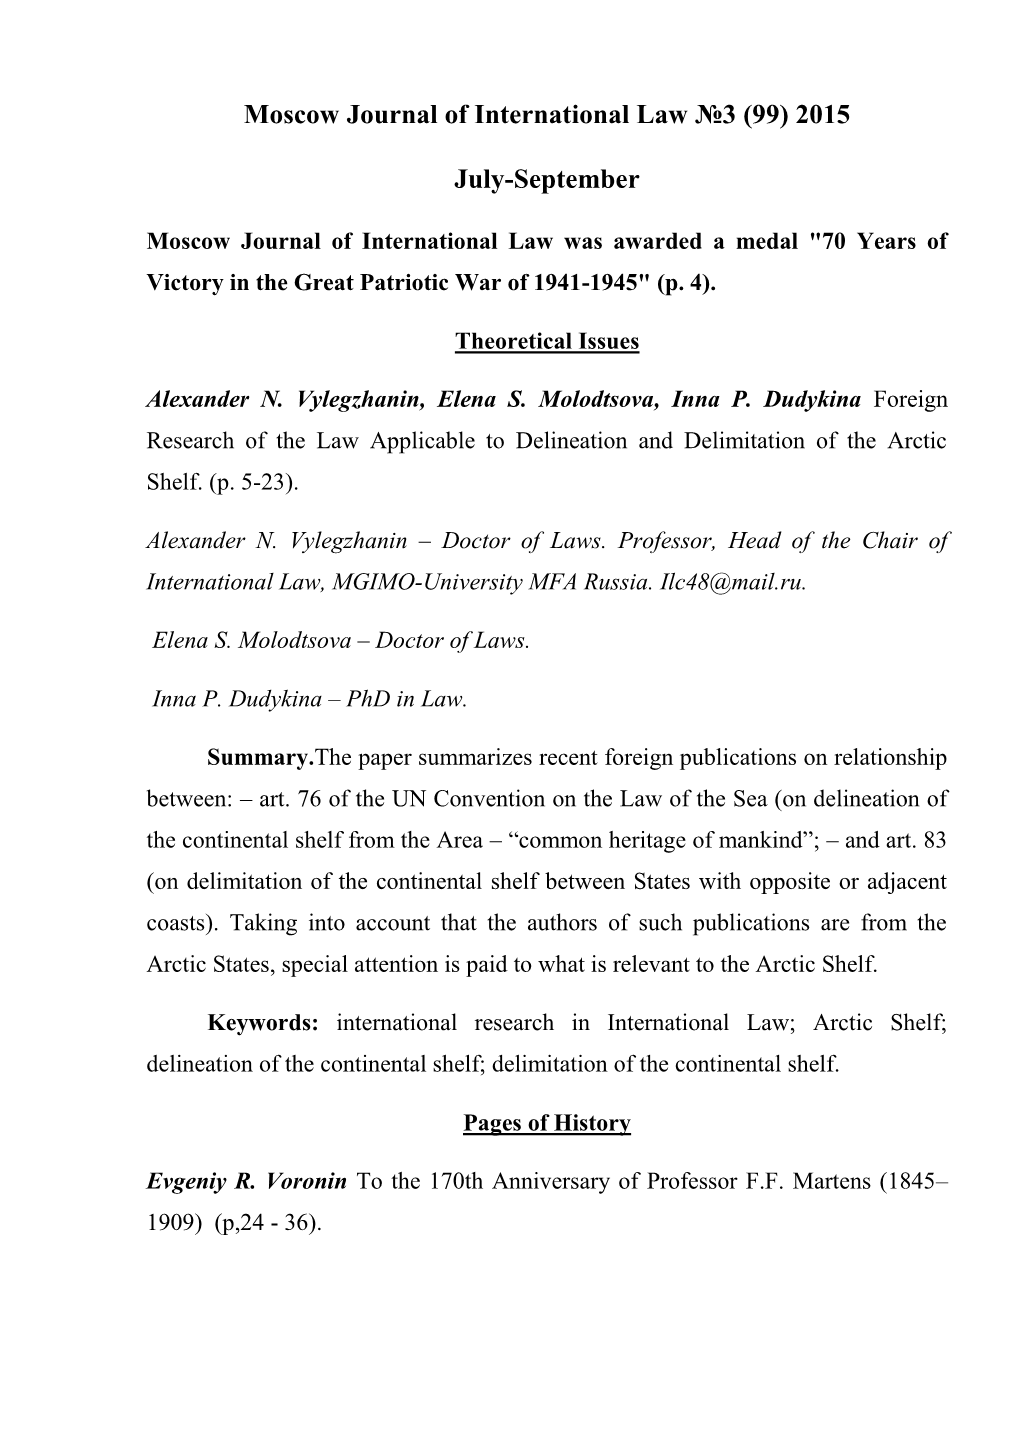 Moscow Journal of International Law №3 (99) 2015 July-September